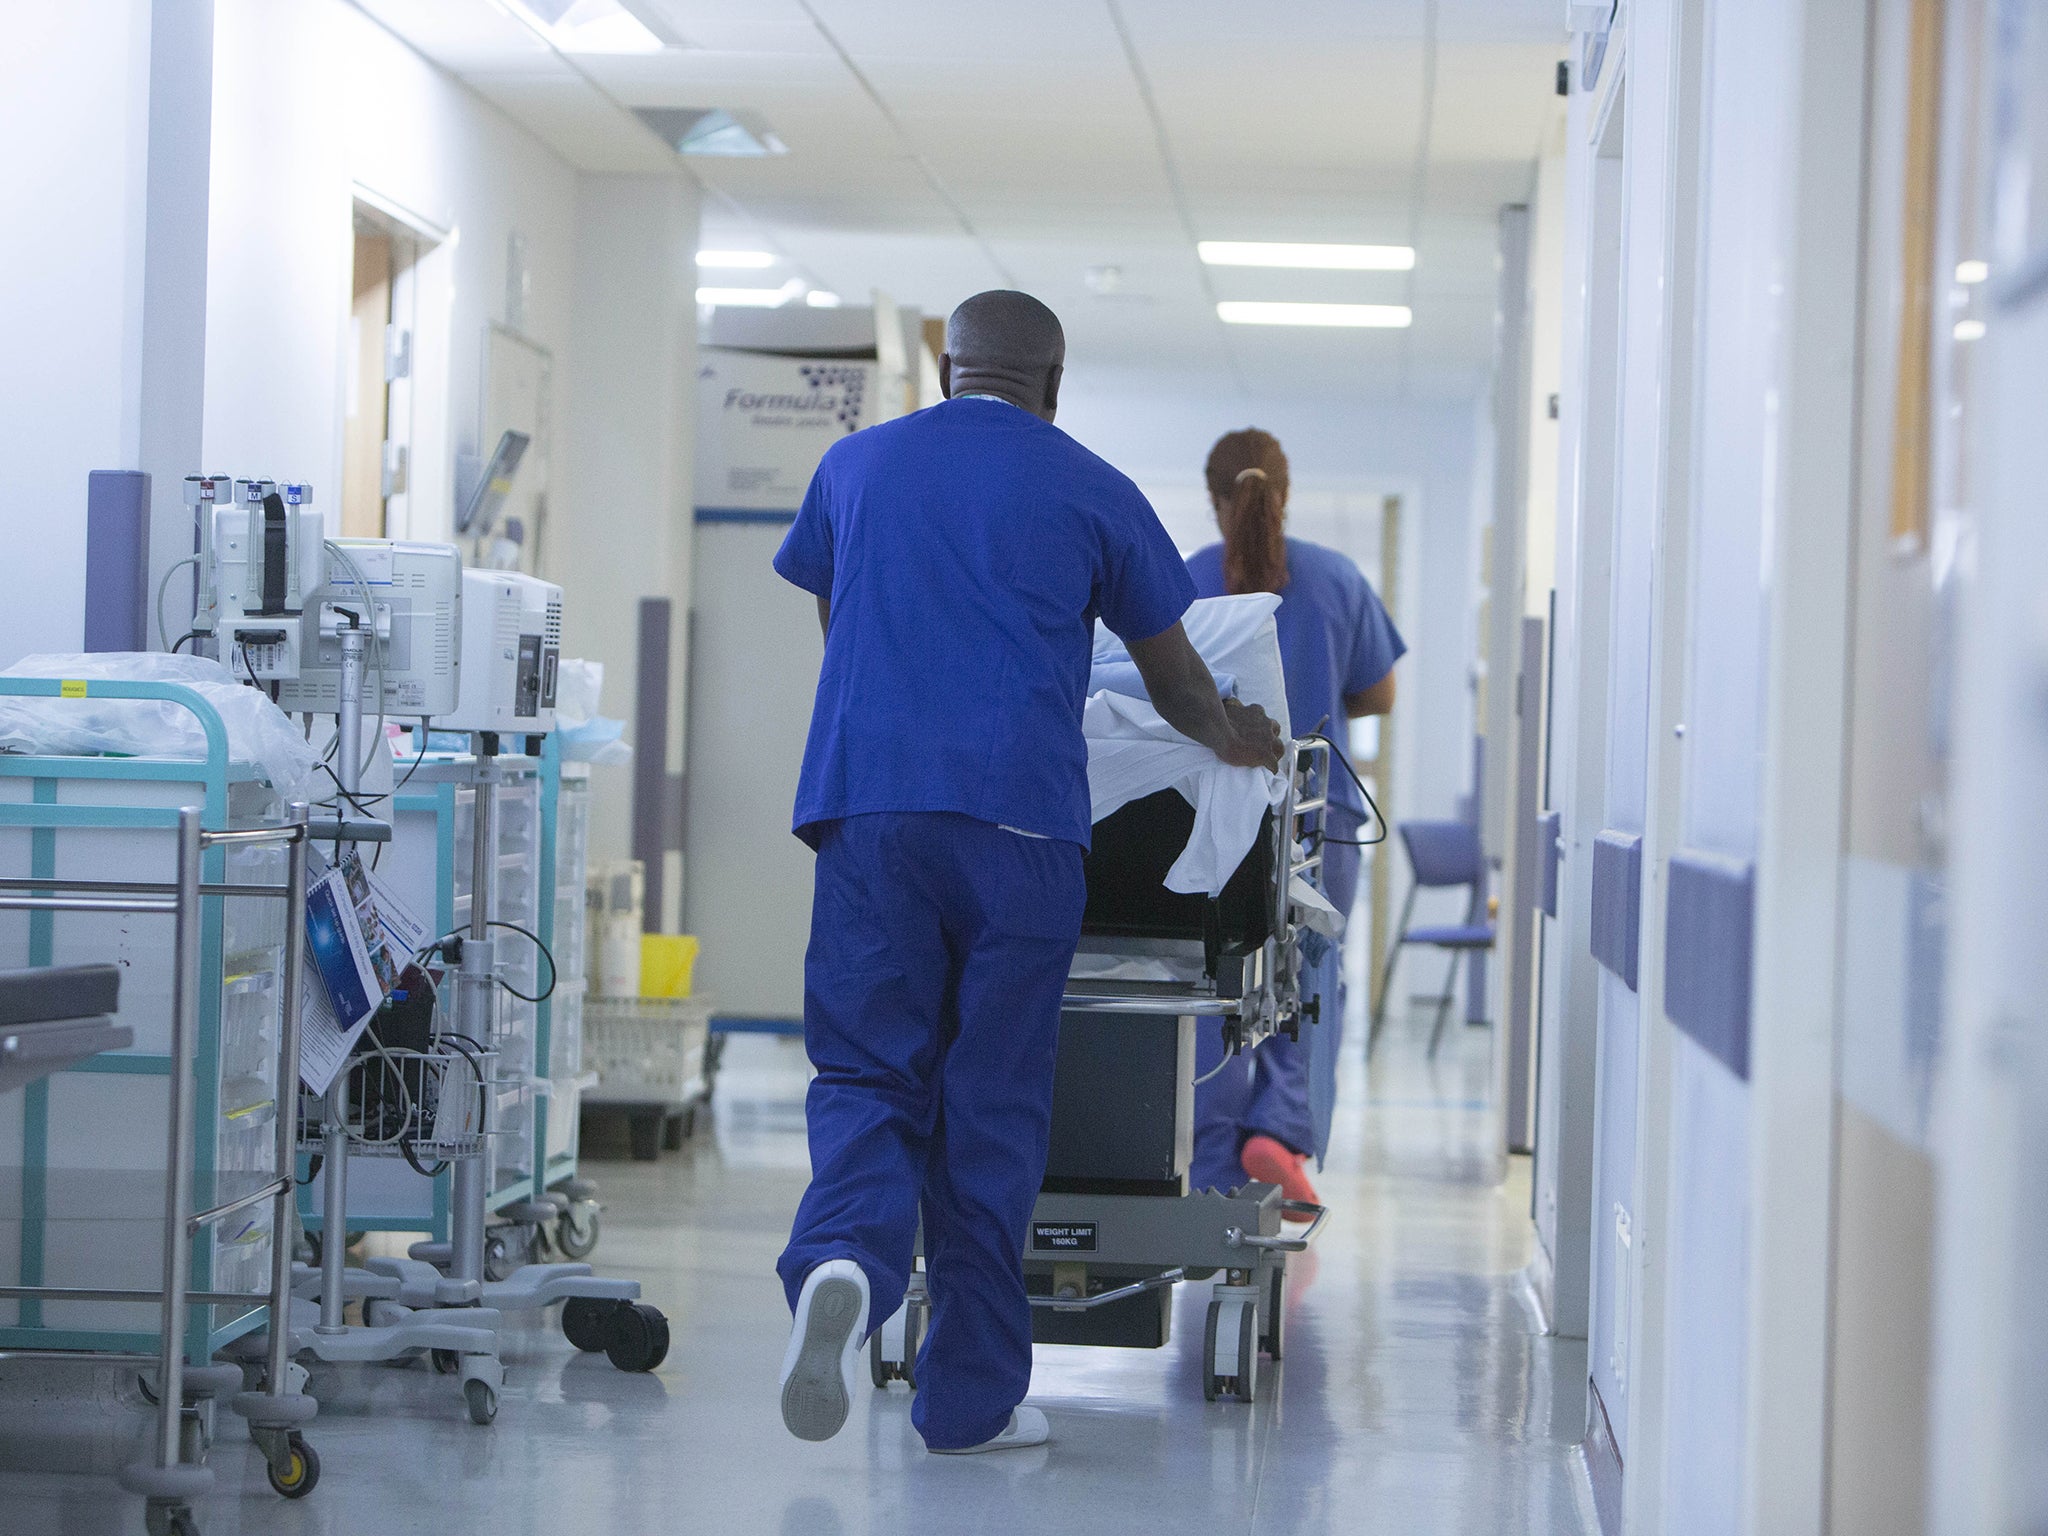 Nurses and doctors are struggling under the pressure placed on the NHS